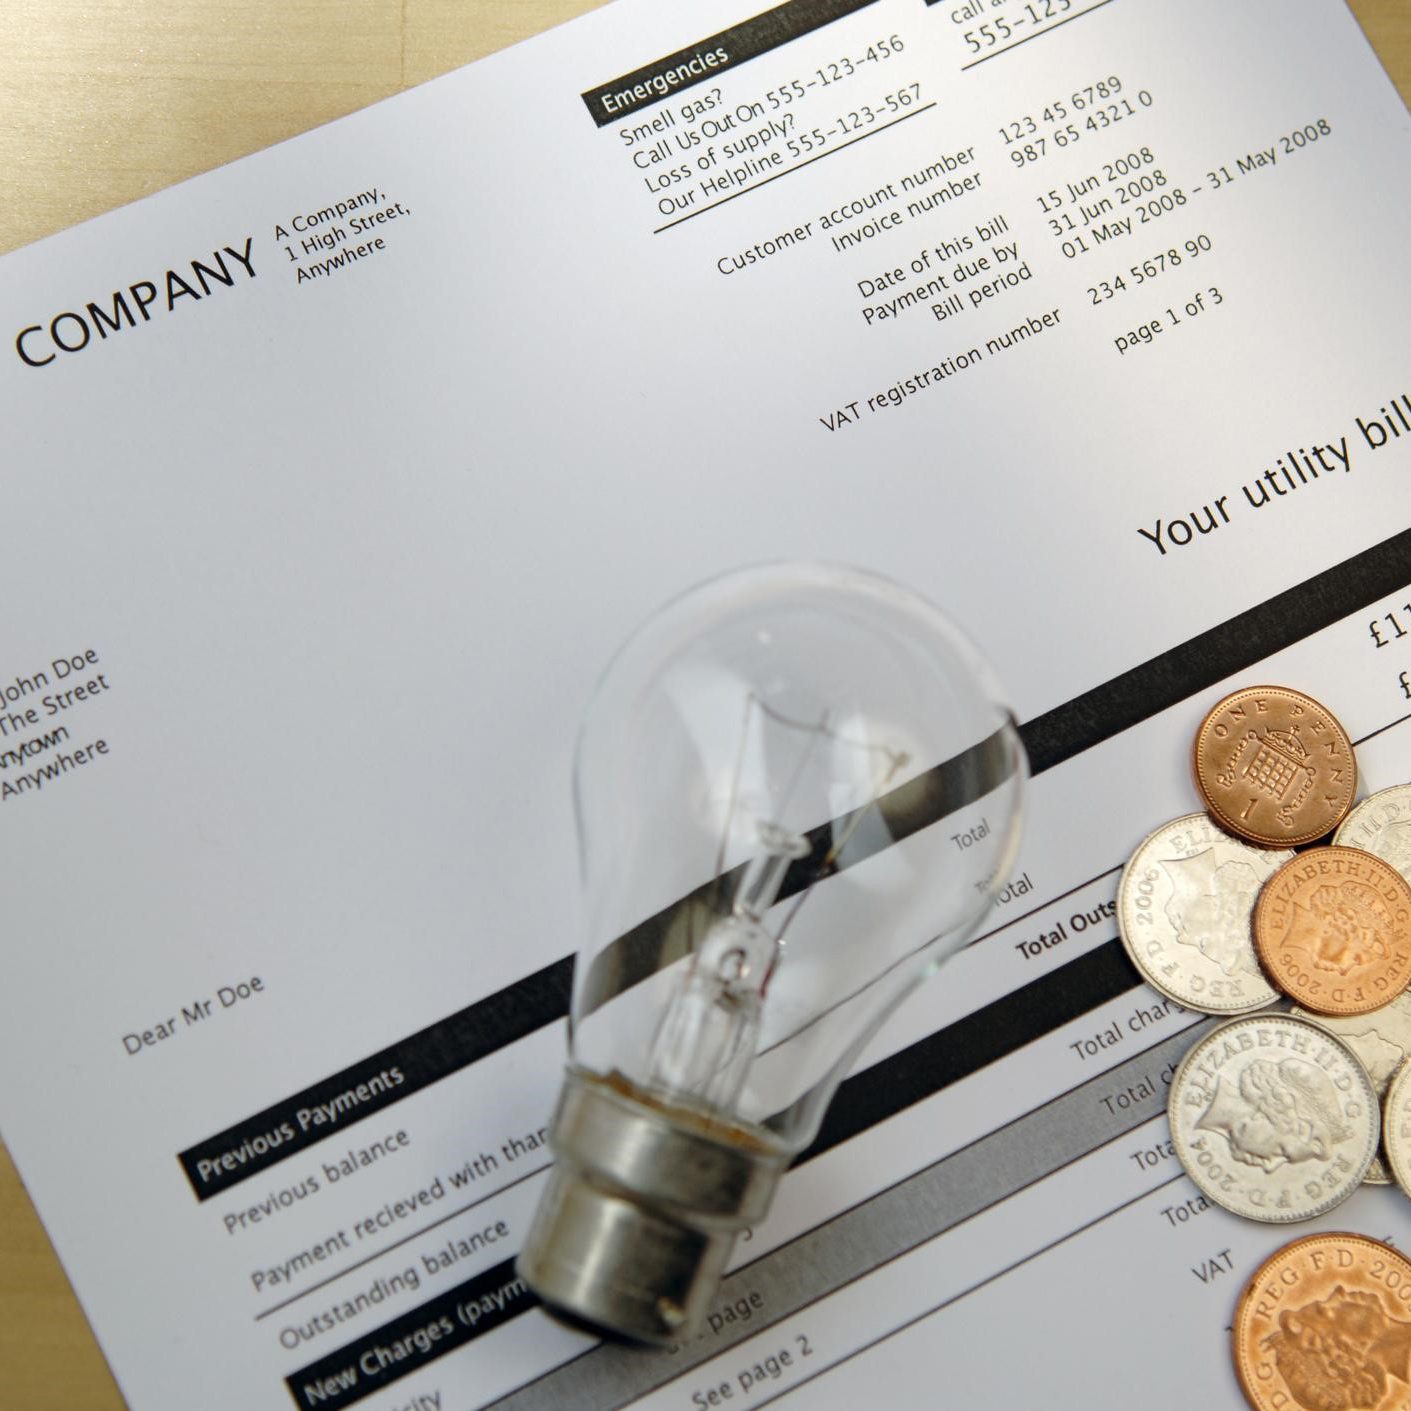 What is the standing charge on my energy bill?